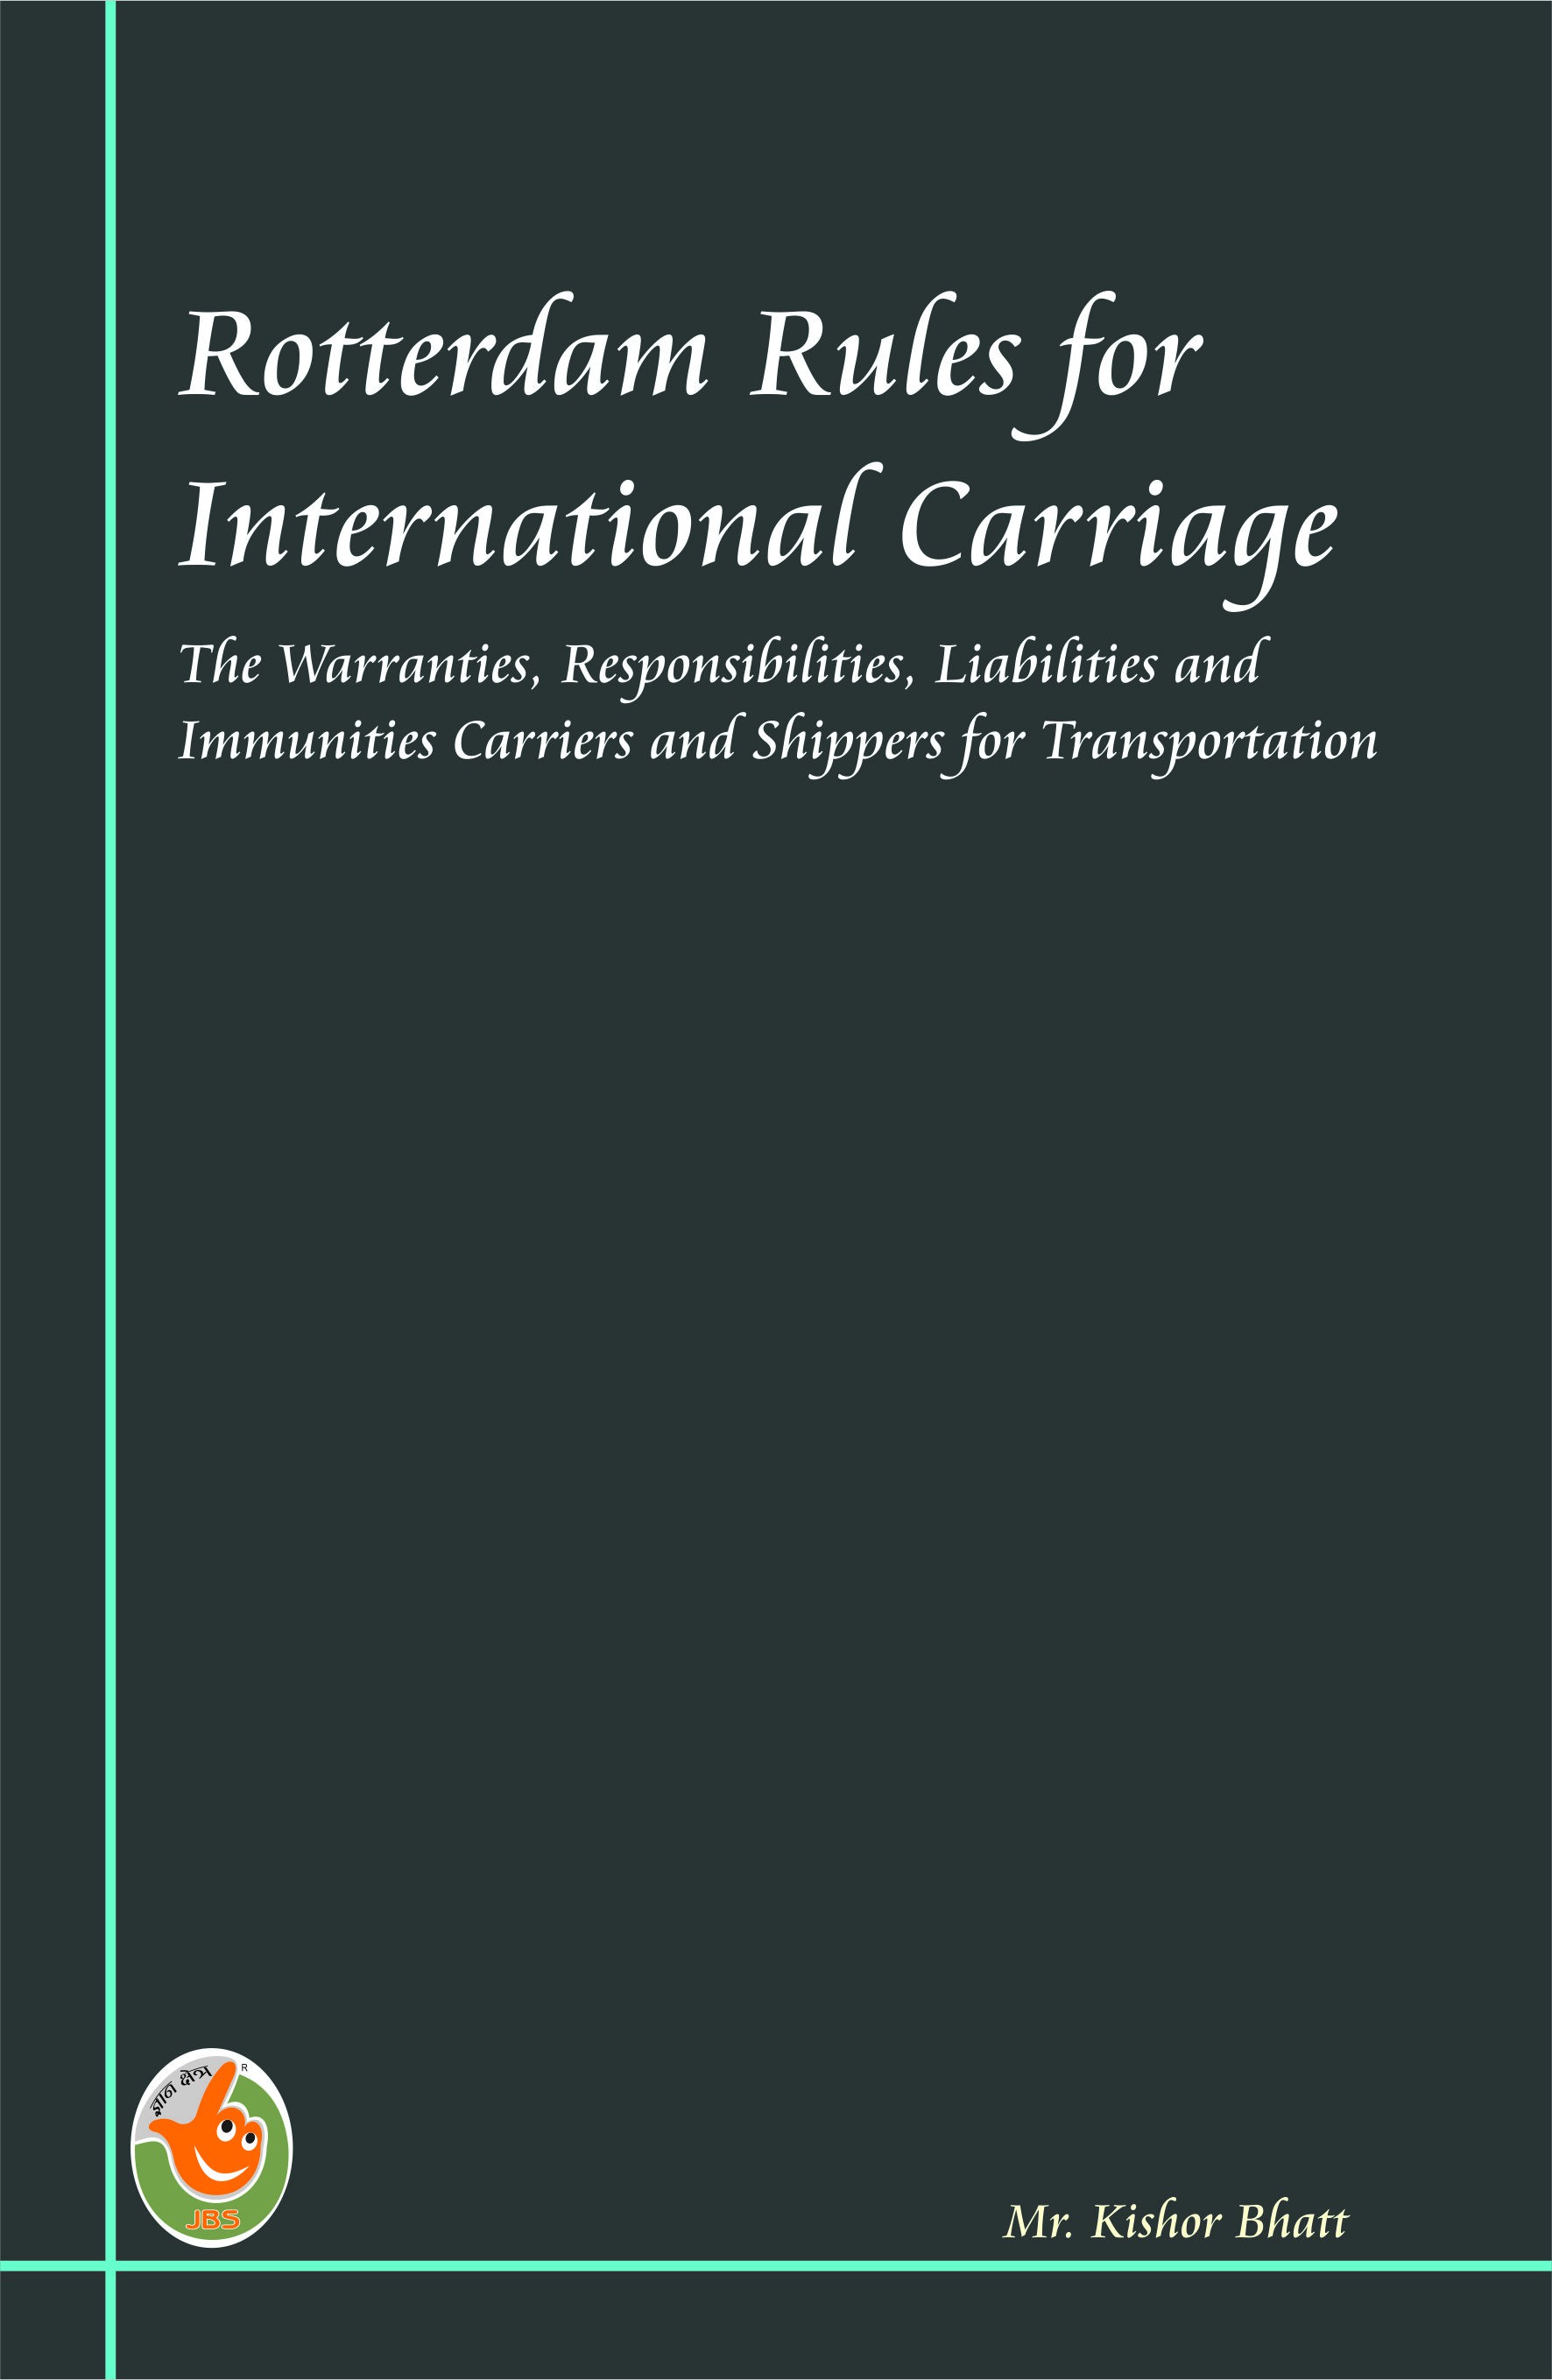 Rotterdam Rules for International Carriage